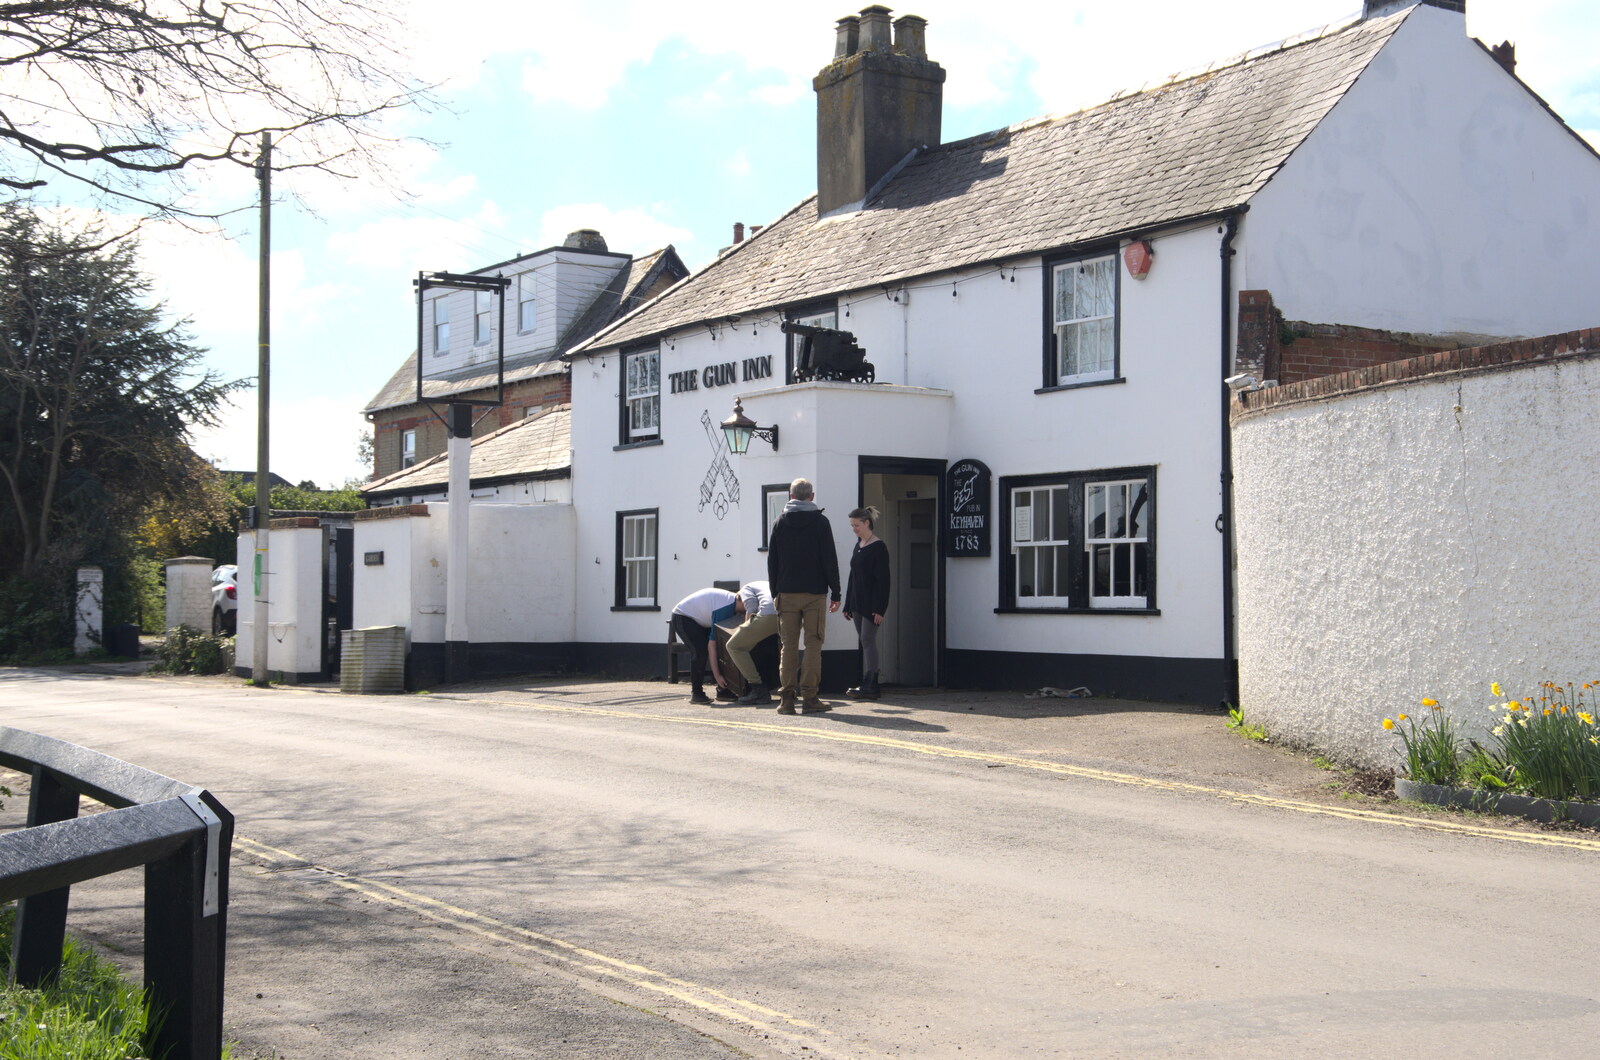 A safe is being hauled out of the Gun Inn from A Day in New Milton, Hampshire - 3rd April 2023